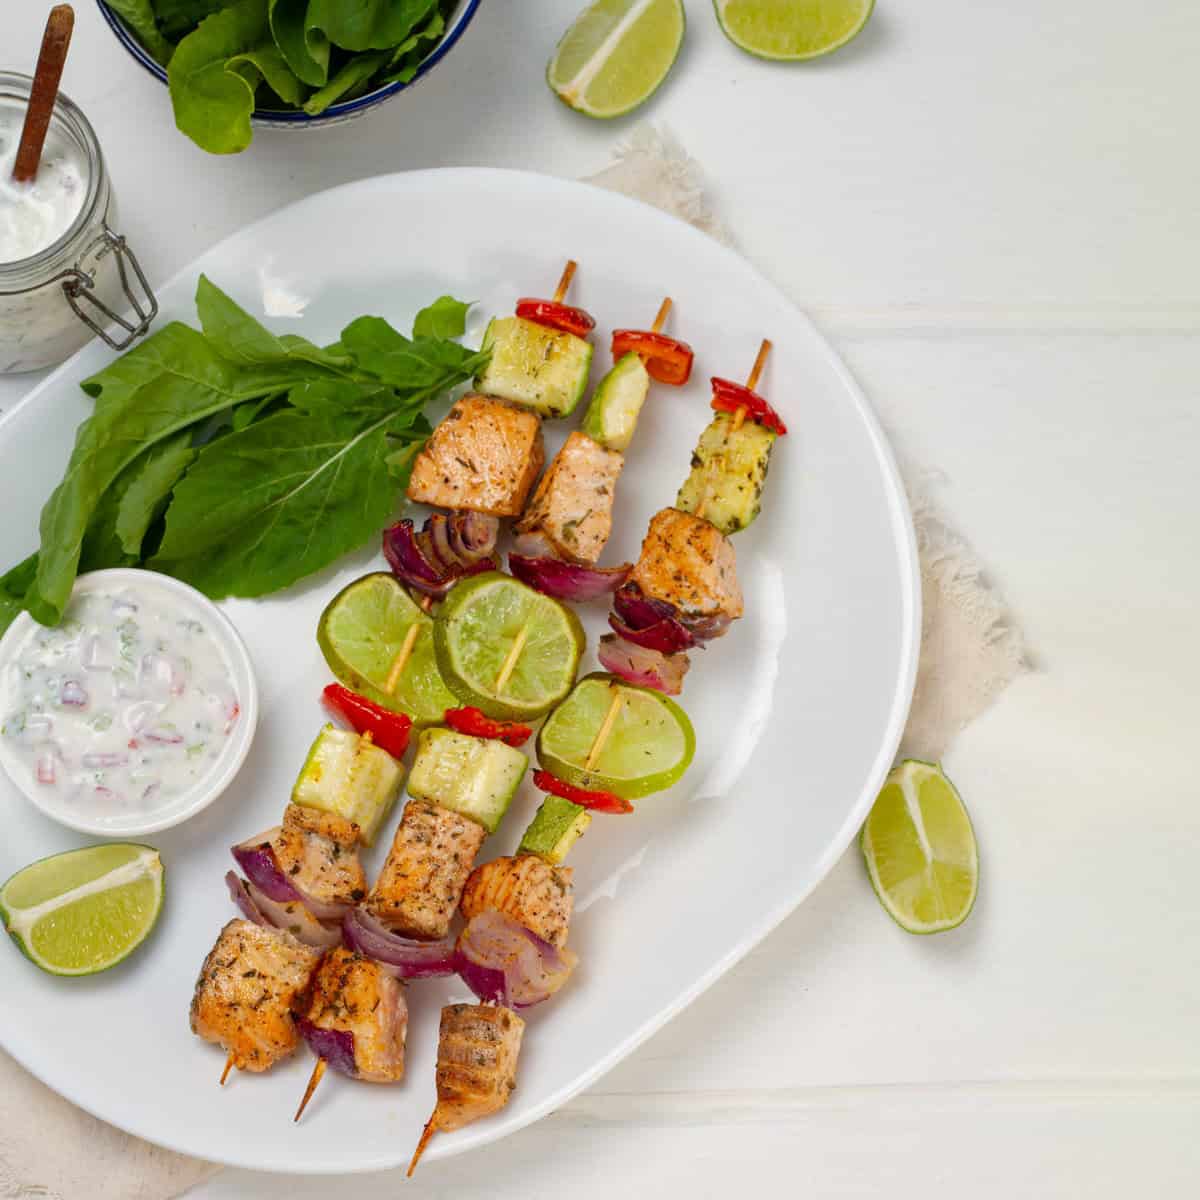 Salmon Skewers served with lemons and greens